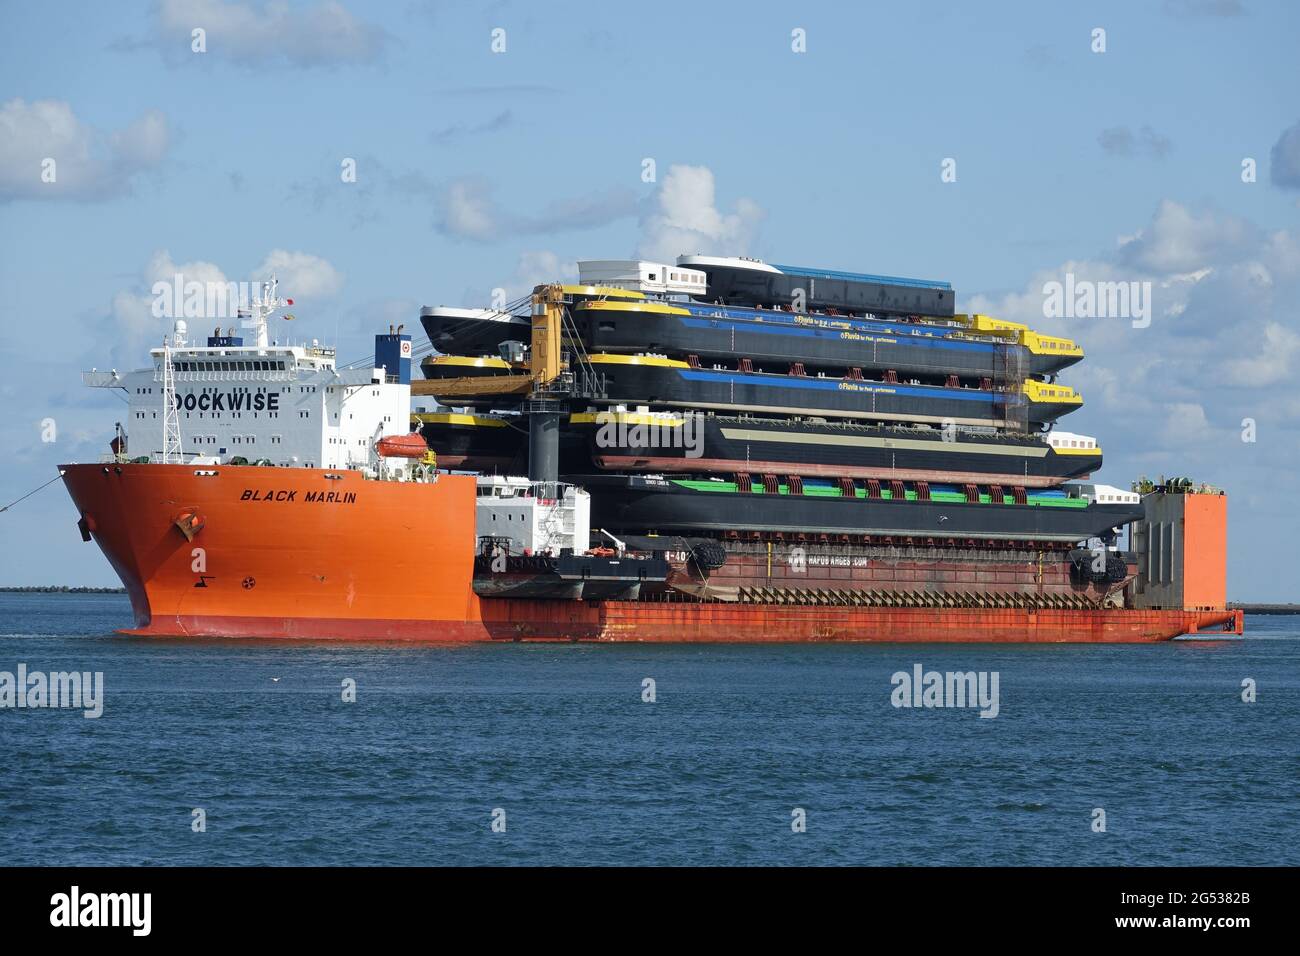 Heavy Load Carrier BLACK MARLIN with cascos arriving Rotterdam Europoort Stock Photo